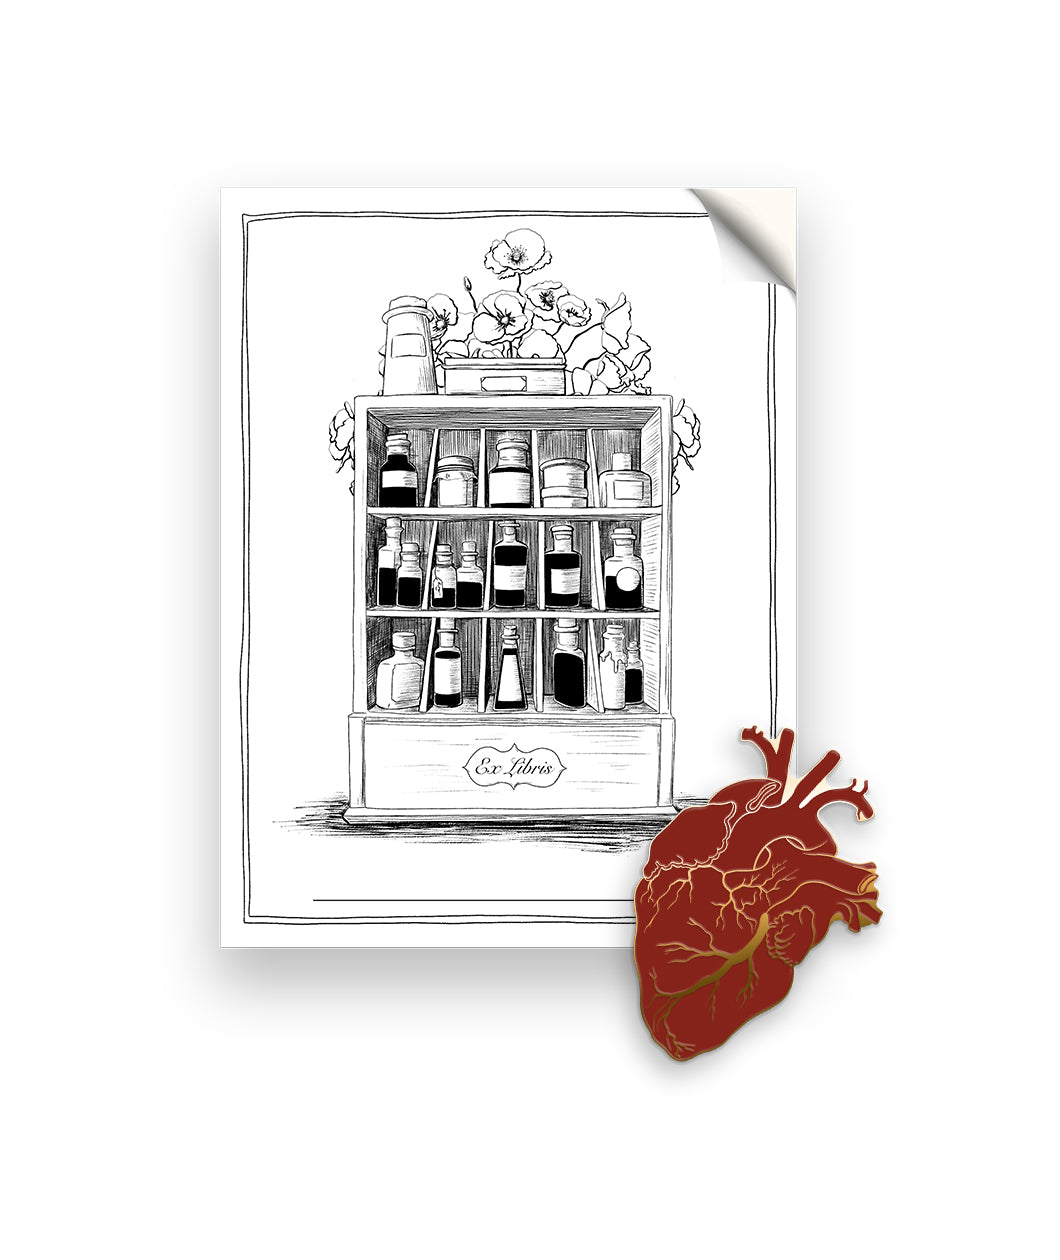 A Noble Blood Bundle featuring a black and white bookplate sticker of a shelf with bottles on it, and a red and gold anatomical heart pin.